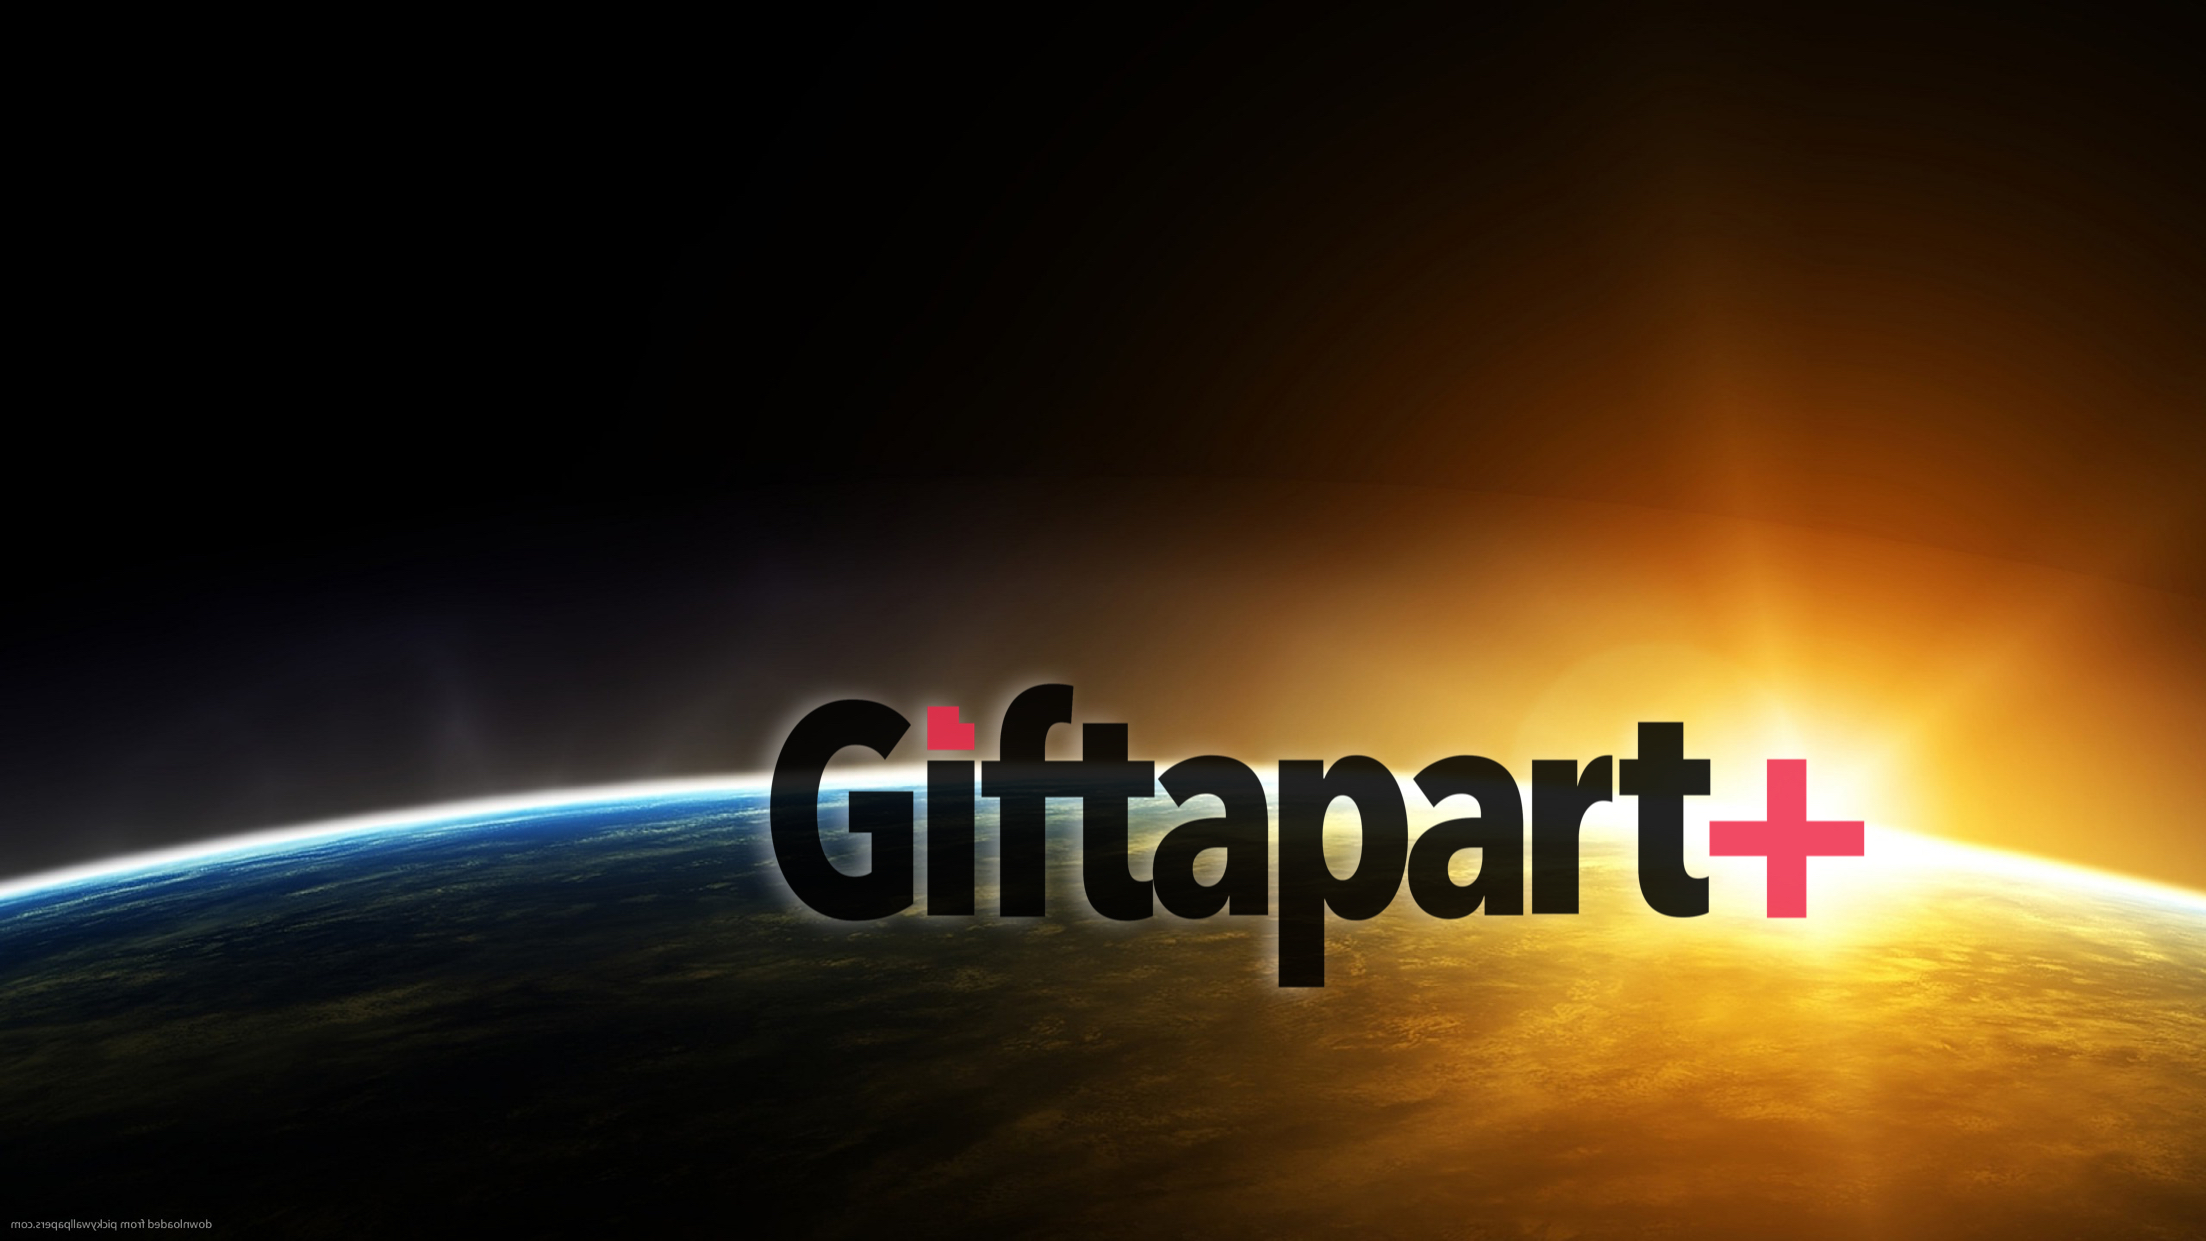 Introducing Giftapart+, live on November 26, bringing a new day of savings to the shopper with free shipping and bigger Cashback Rewards!